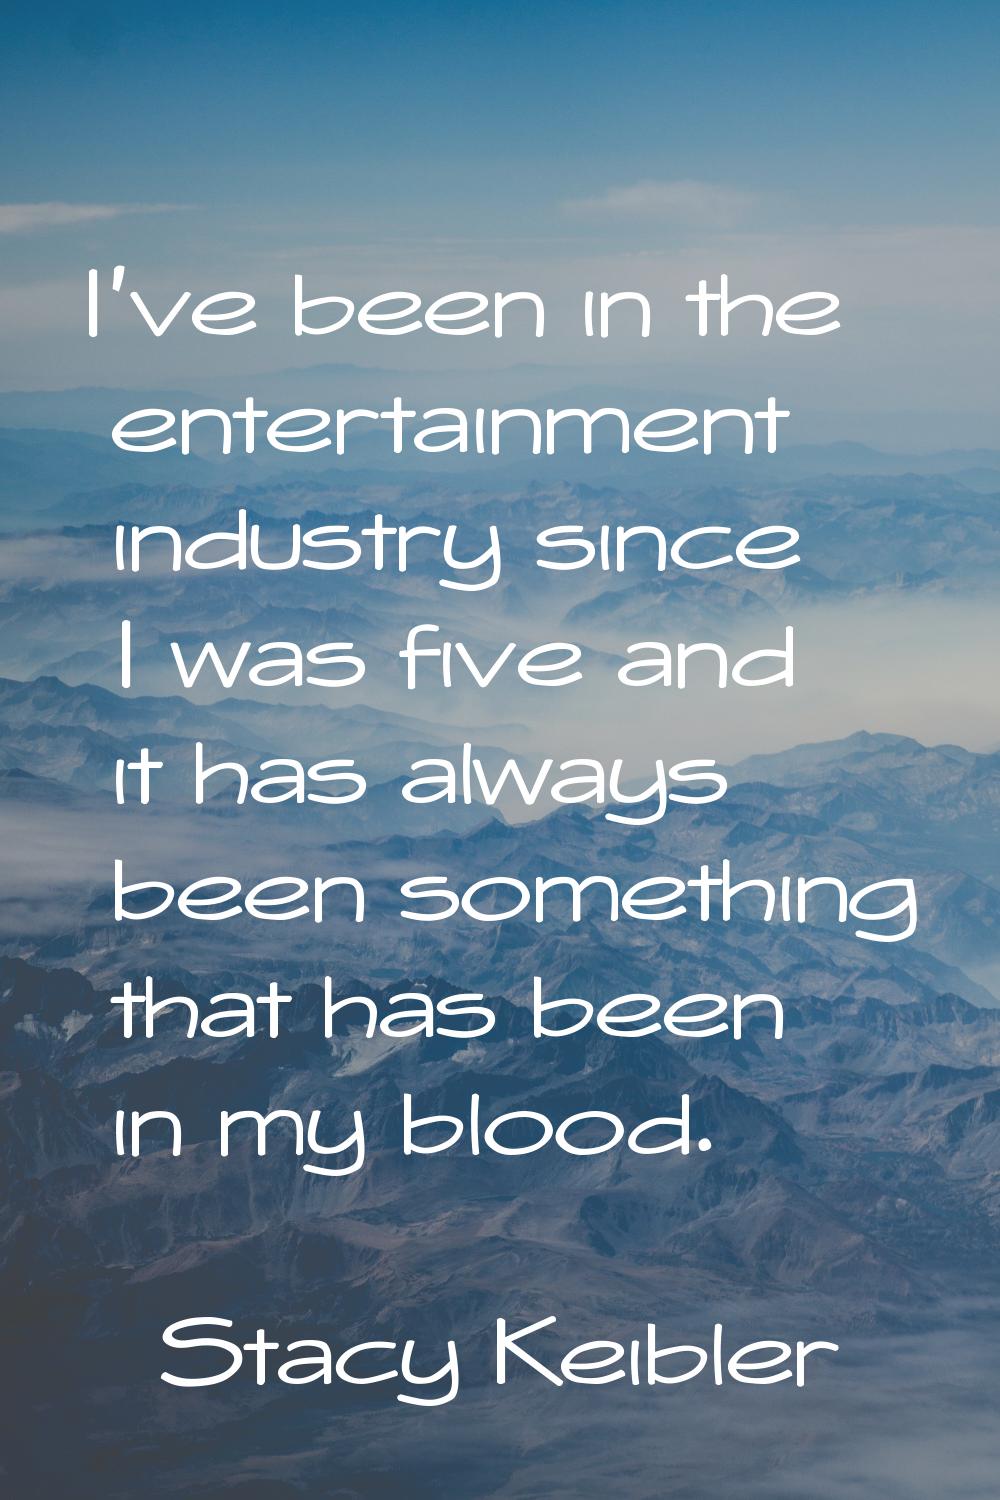 I've been in the entertainment industry since I was five and it has always been something that has 